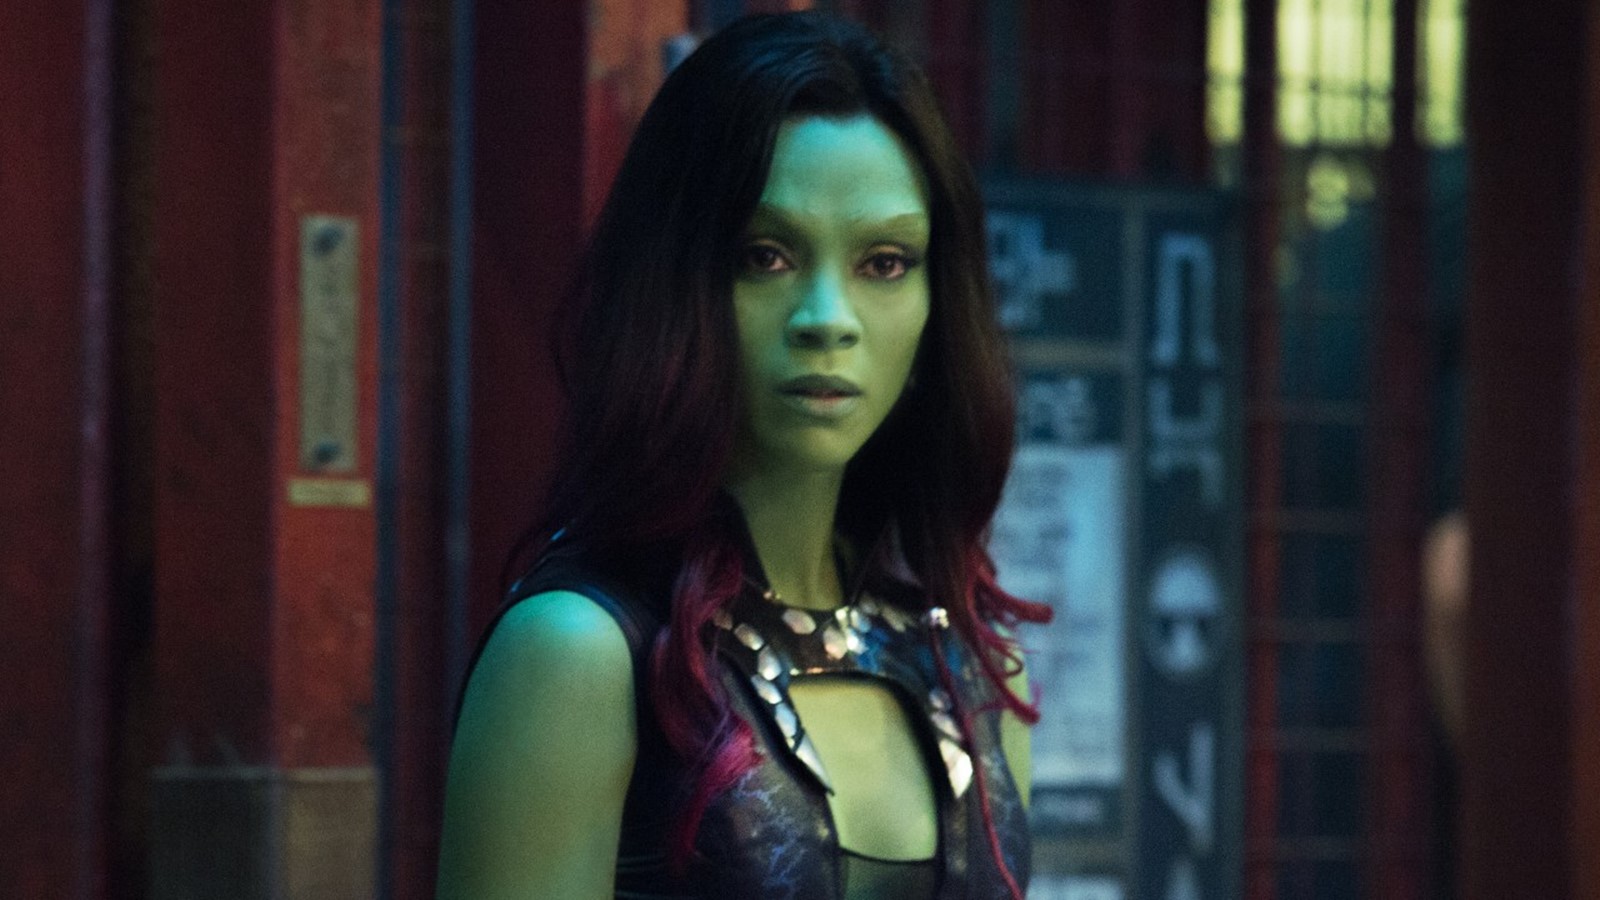 Guardians of the Galaxy Vol. 3, Zoe Saldana: "I'm done with Gamora, I hope there is a recast in the future"